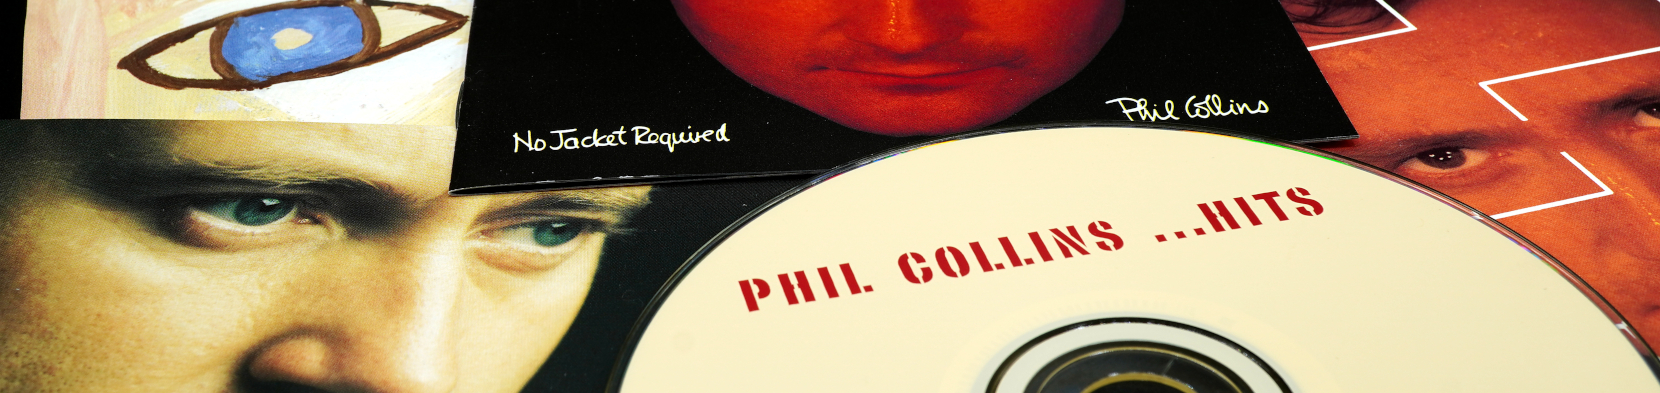 A collection of Phil Collins records